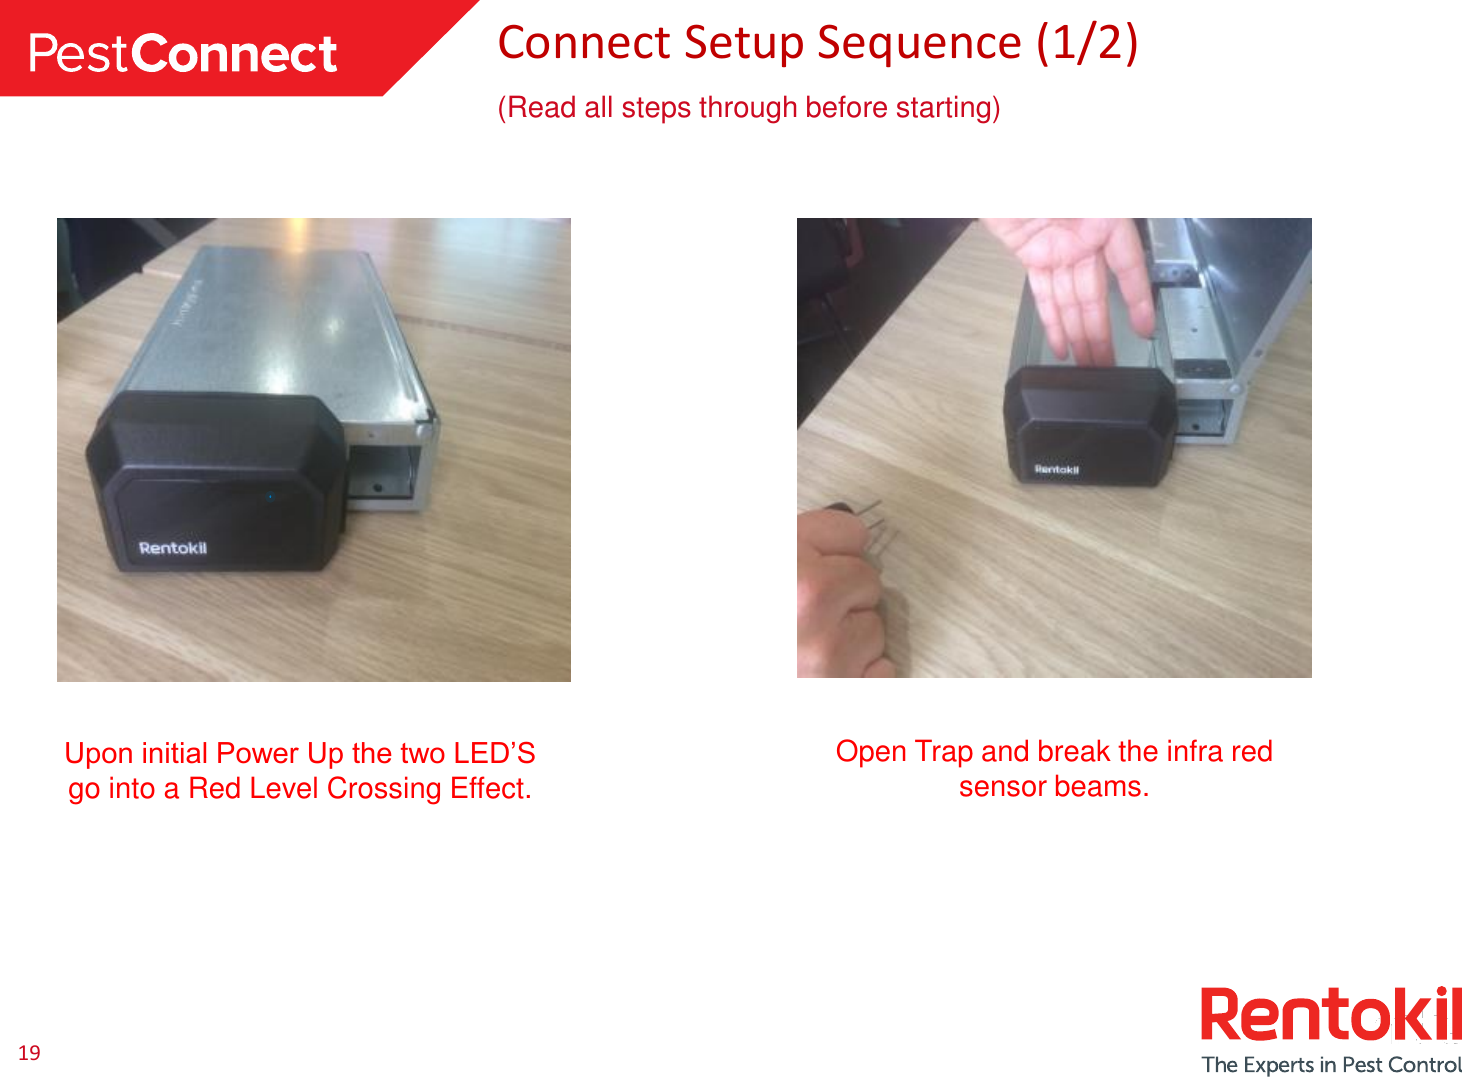 19 Connect Setup Sequence (1/2) (Read all steps through before starting) Upon initial Power Up the two LED’S go into a Red Level Crossing Effect. Open Trap and break the infra red sensor beams.  